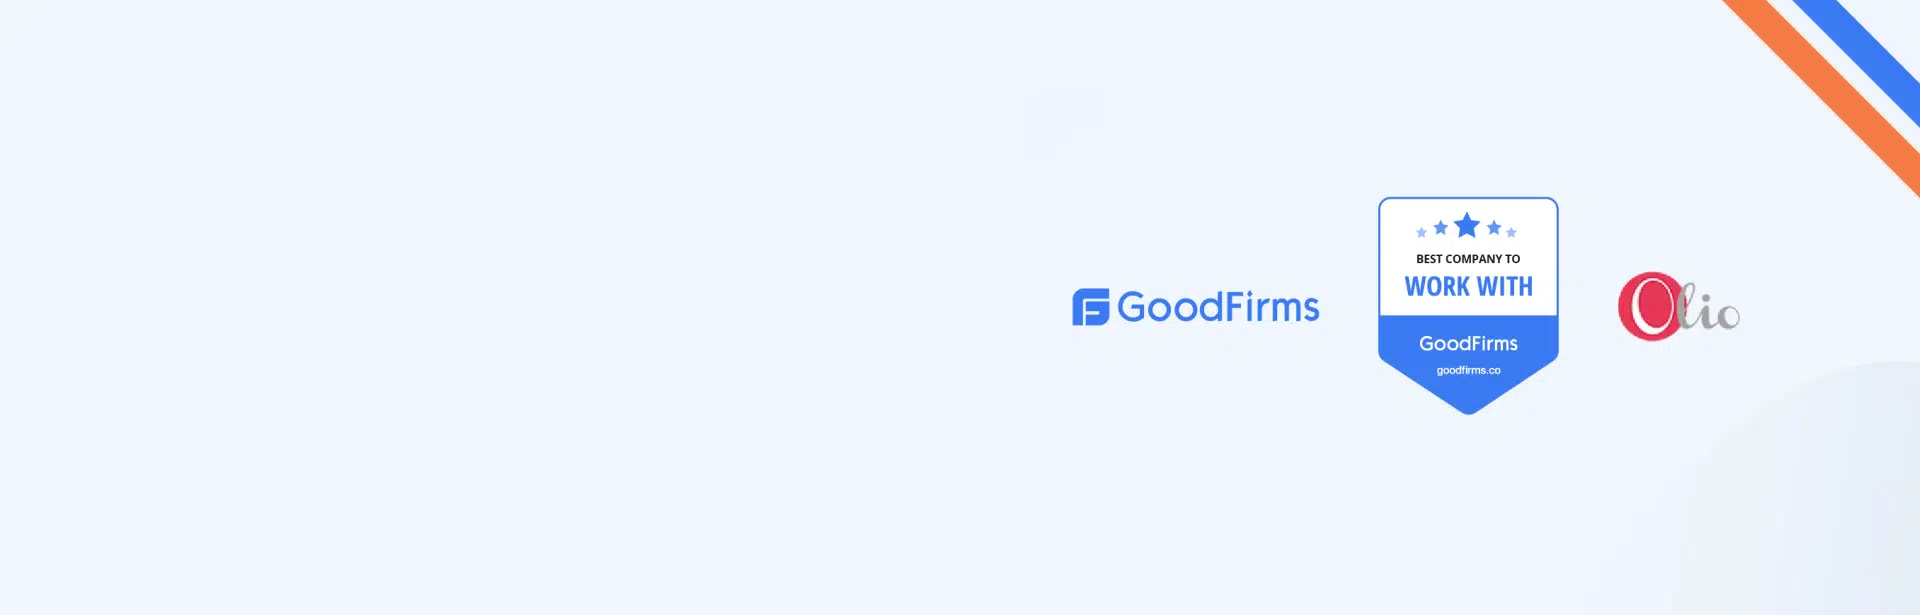 Olio Recognized by GoodFirms as the Best Company to Work With